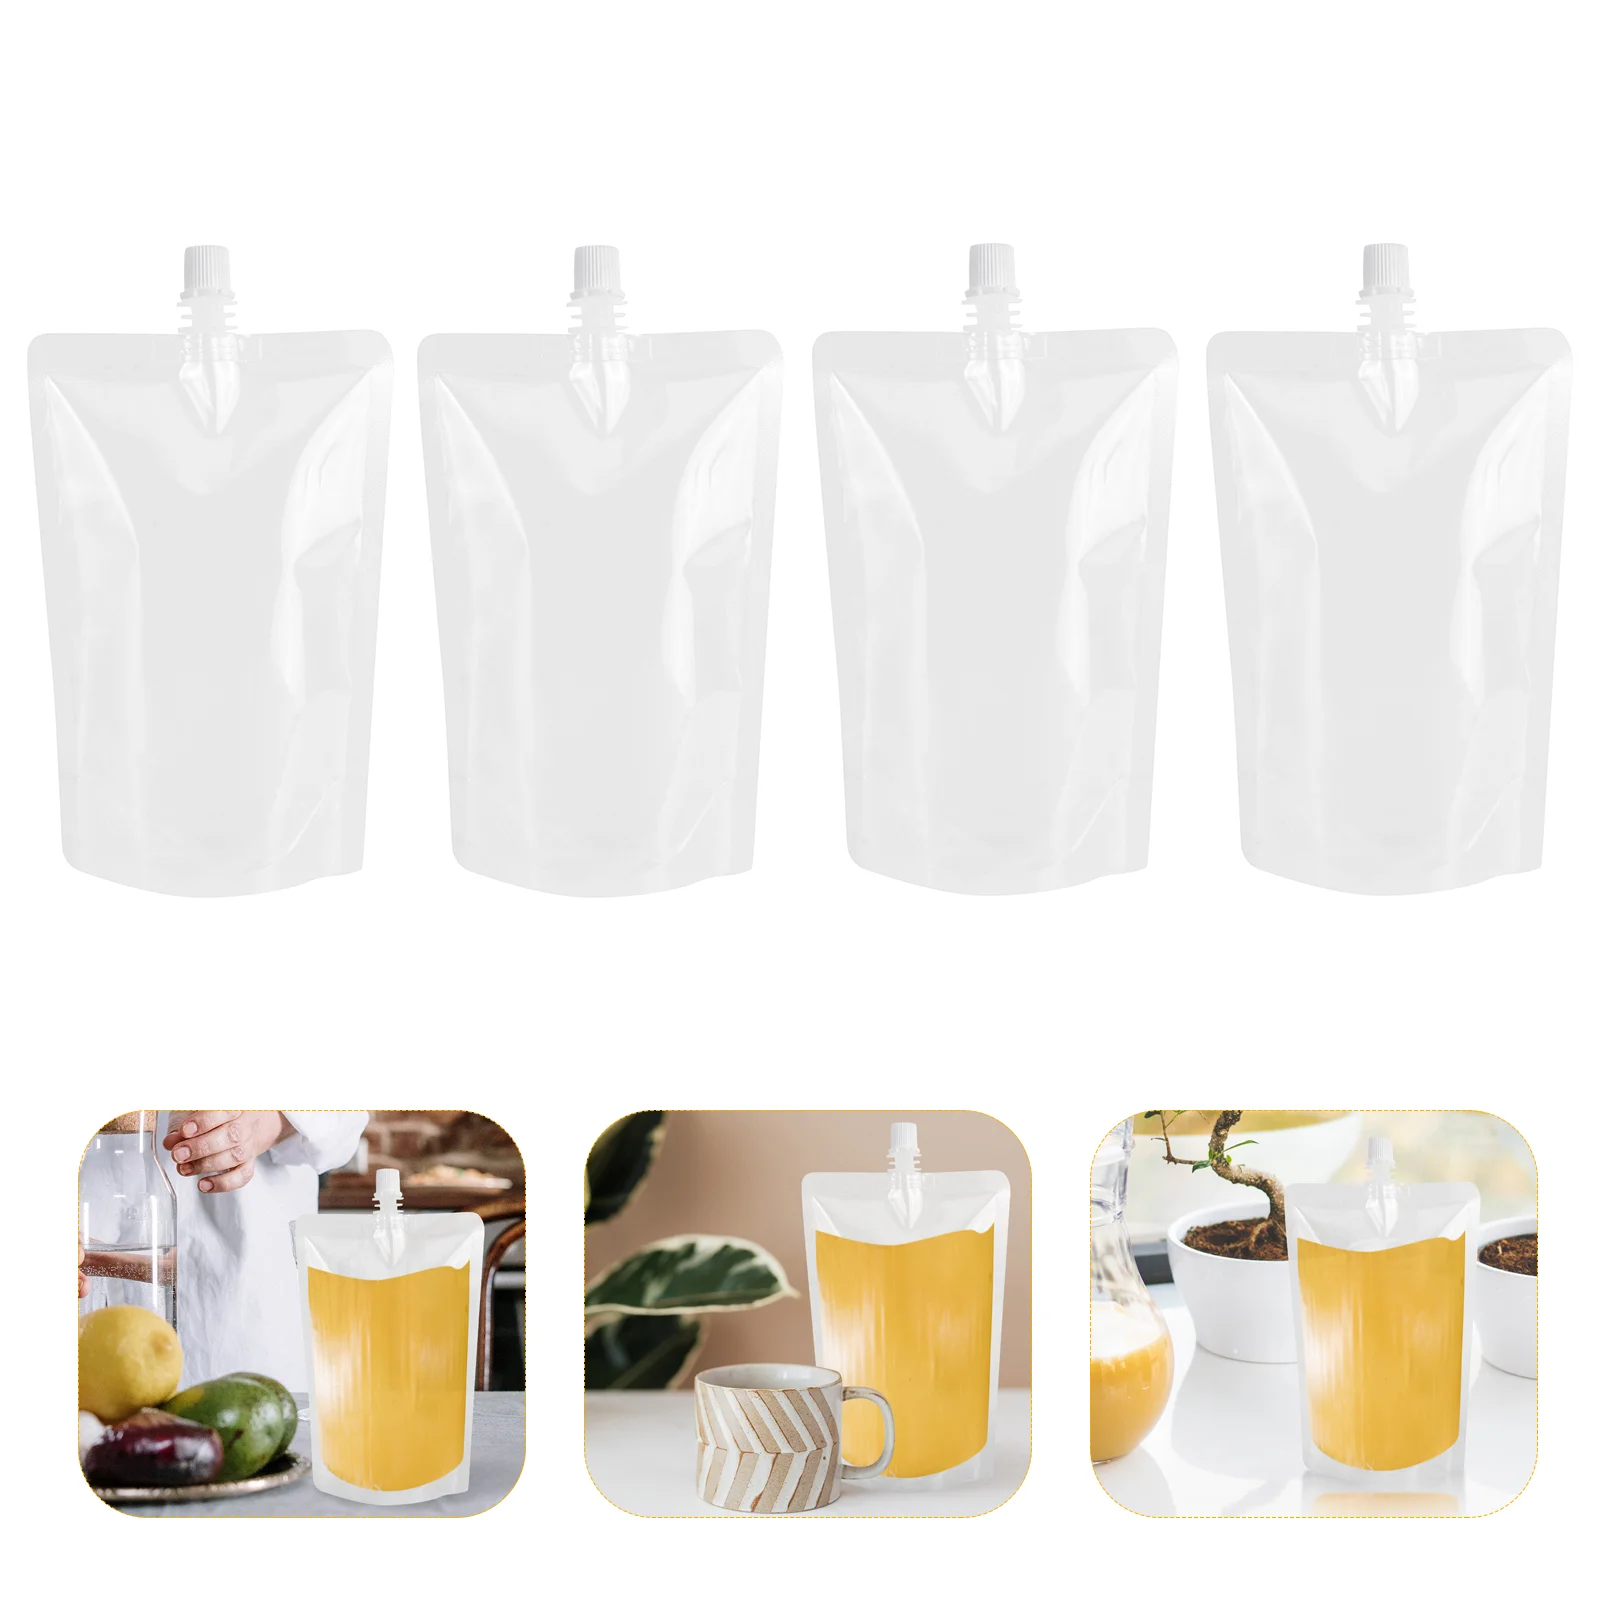 

50pcs 500ml Drinks Flasks Container Take out Beverage Bags Reclosable for Travel Outdoor